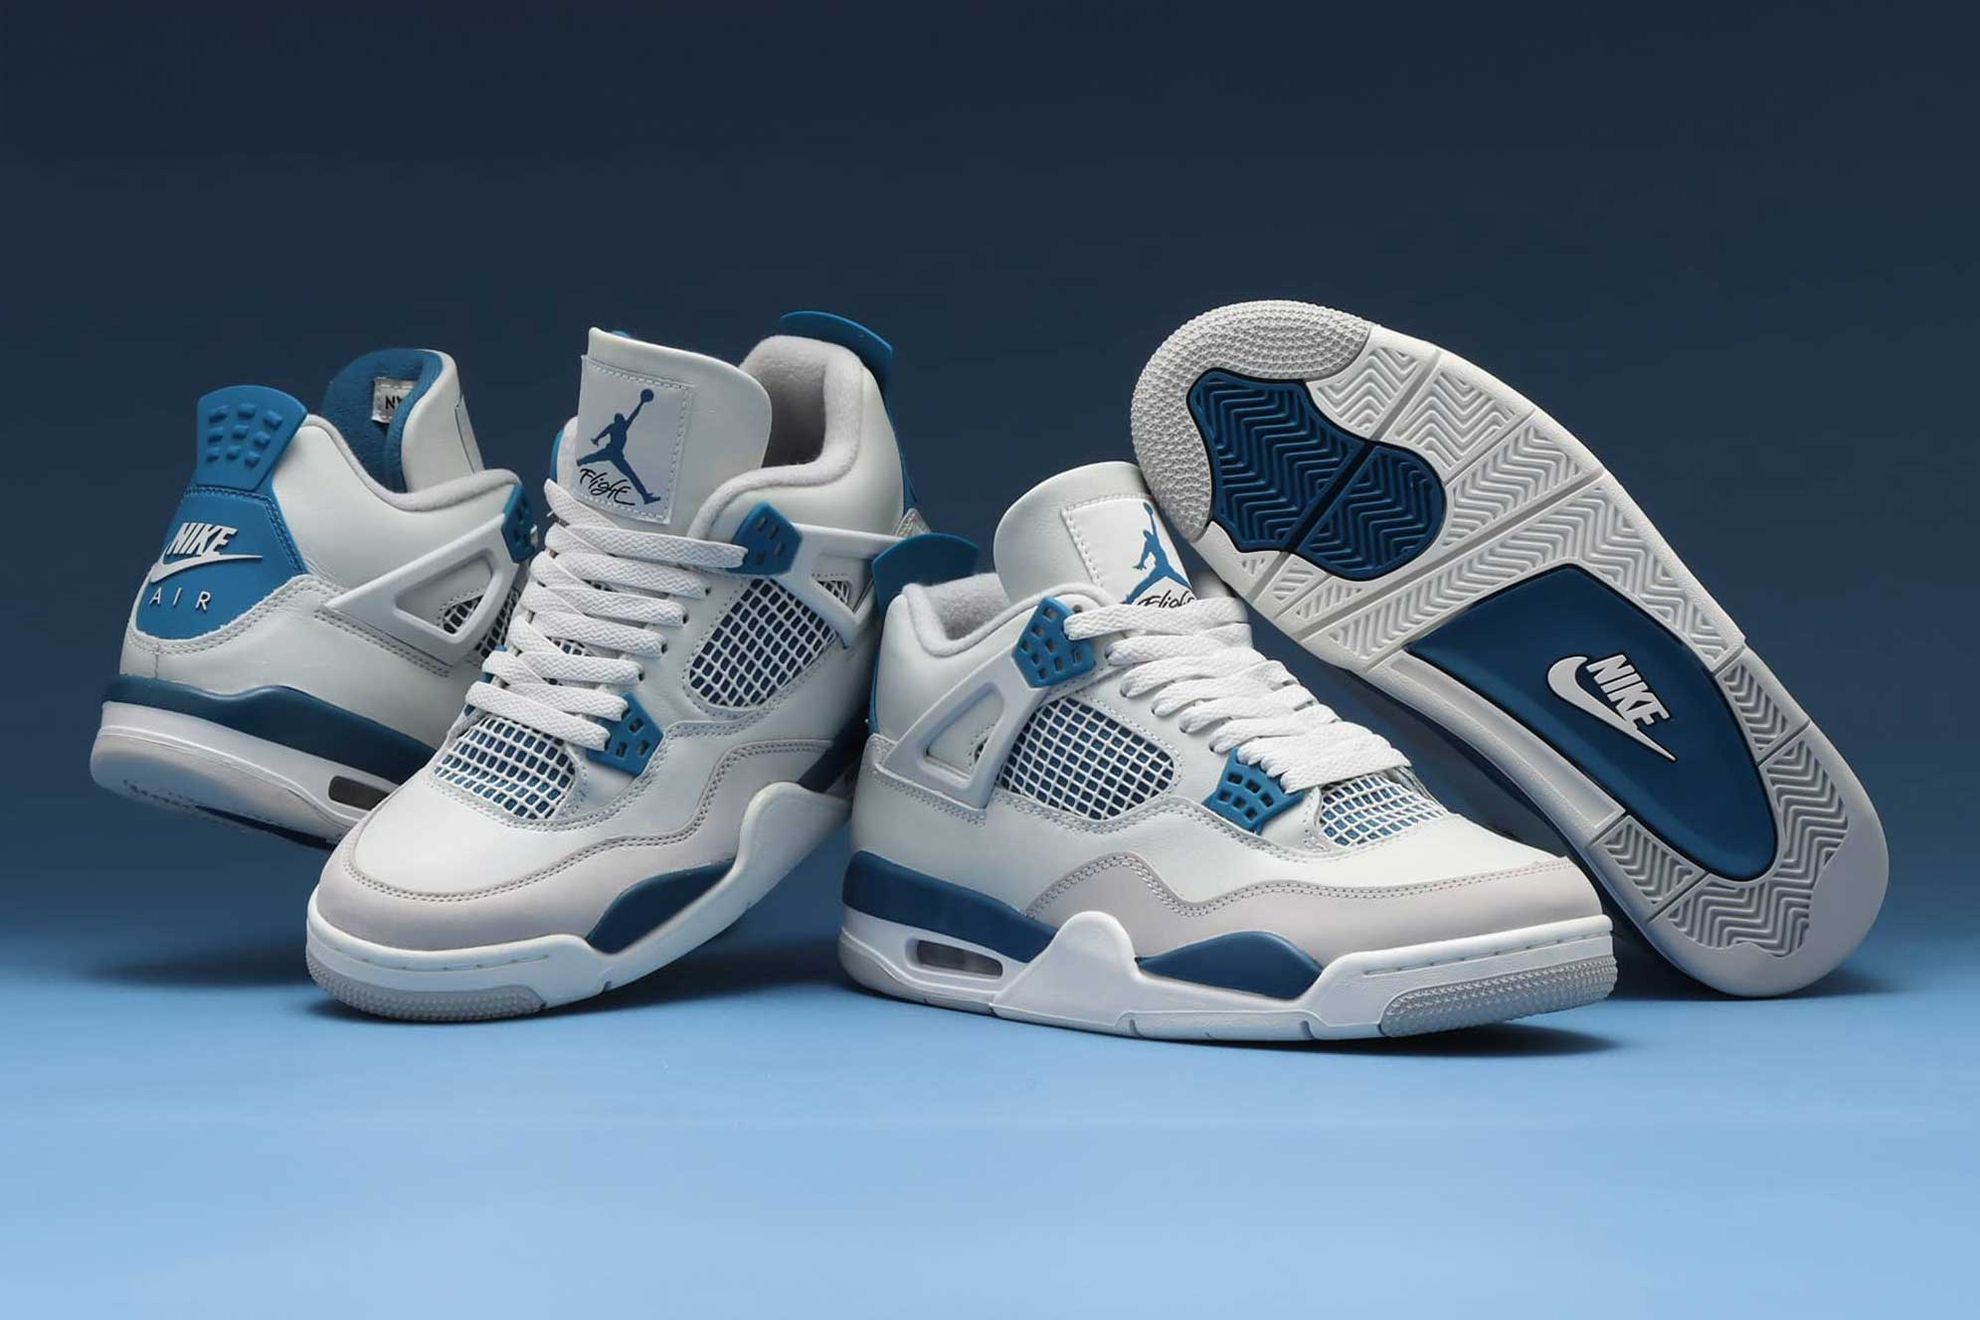 Everything We Know About the Air Jordan 4 'Military Blue'